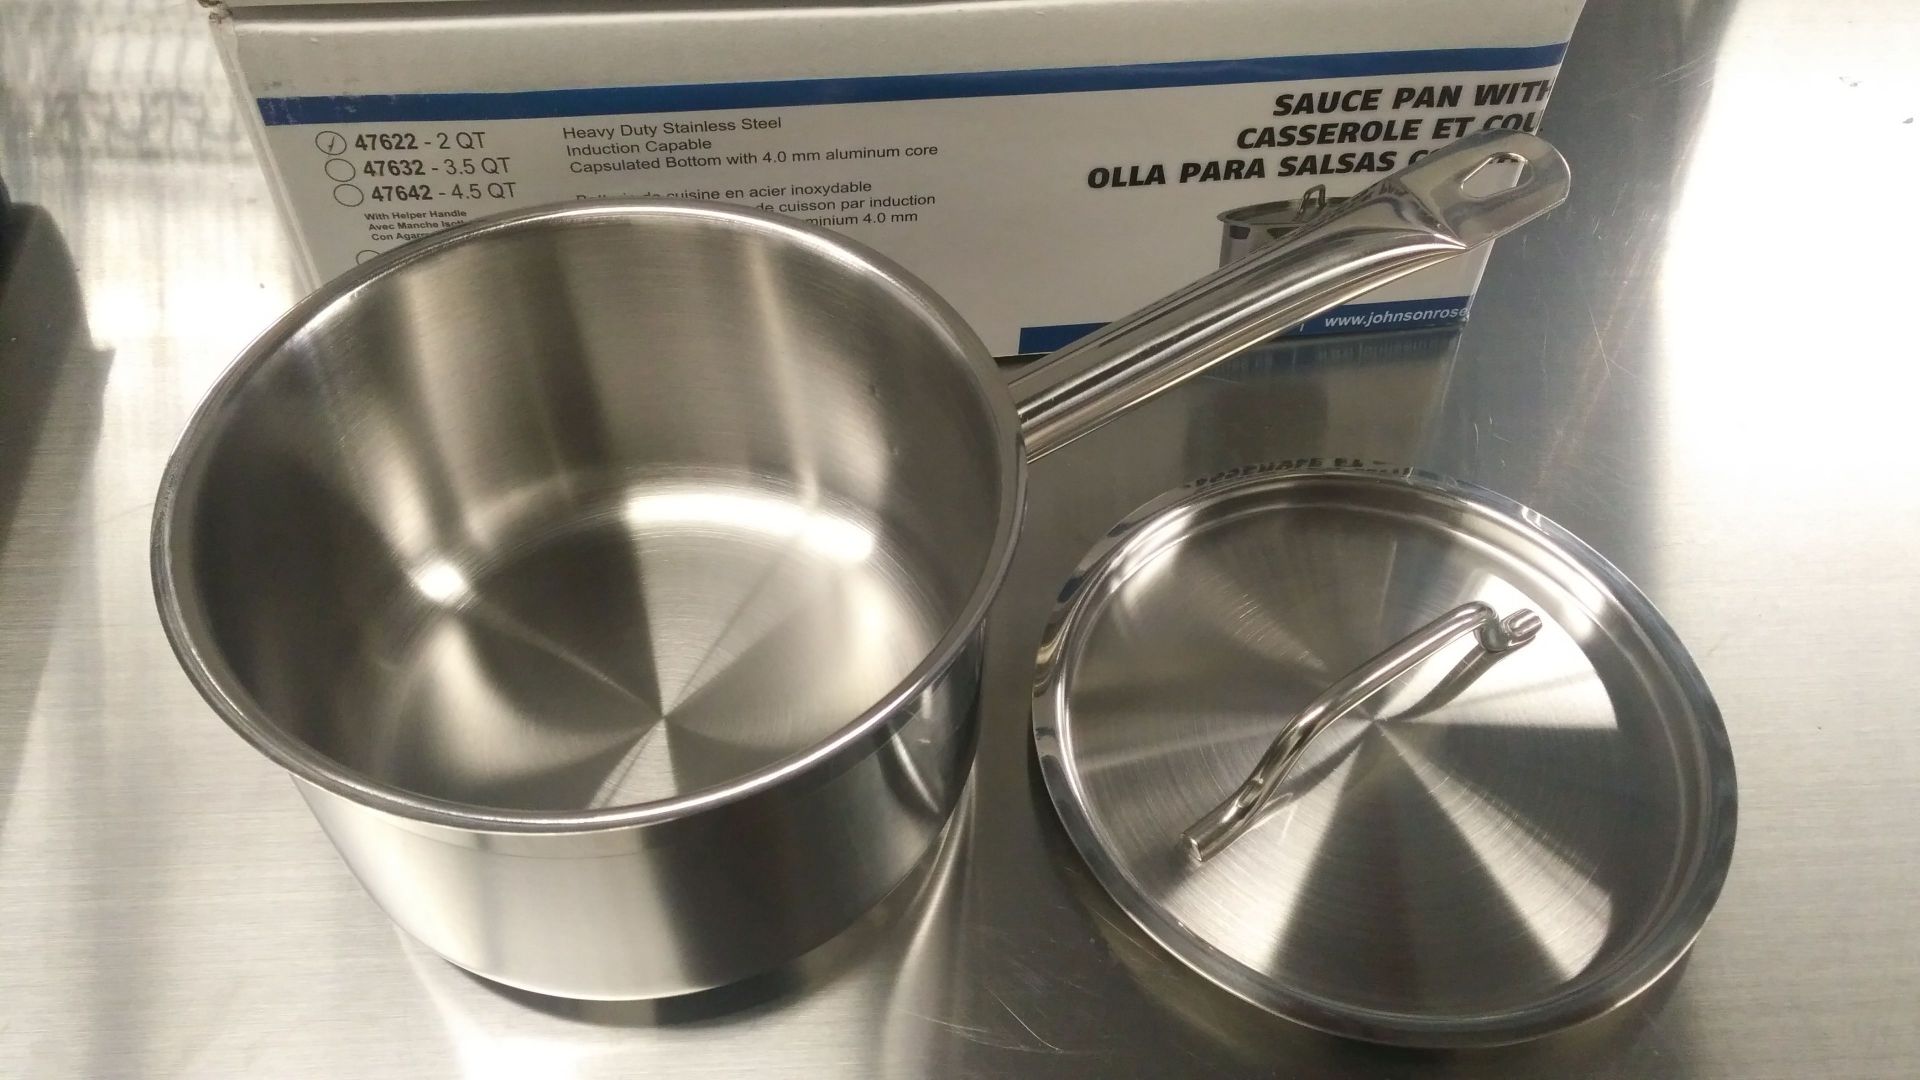 2qt Heavy Duty Stainless Sauce Pan Induction Capable, JR 47622 - Image 3 of 4